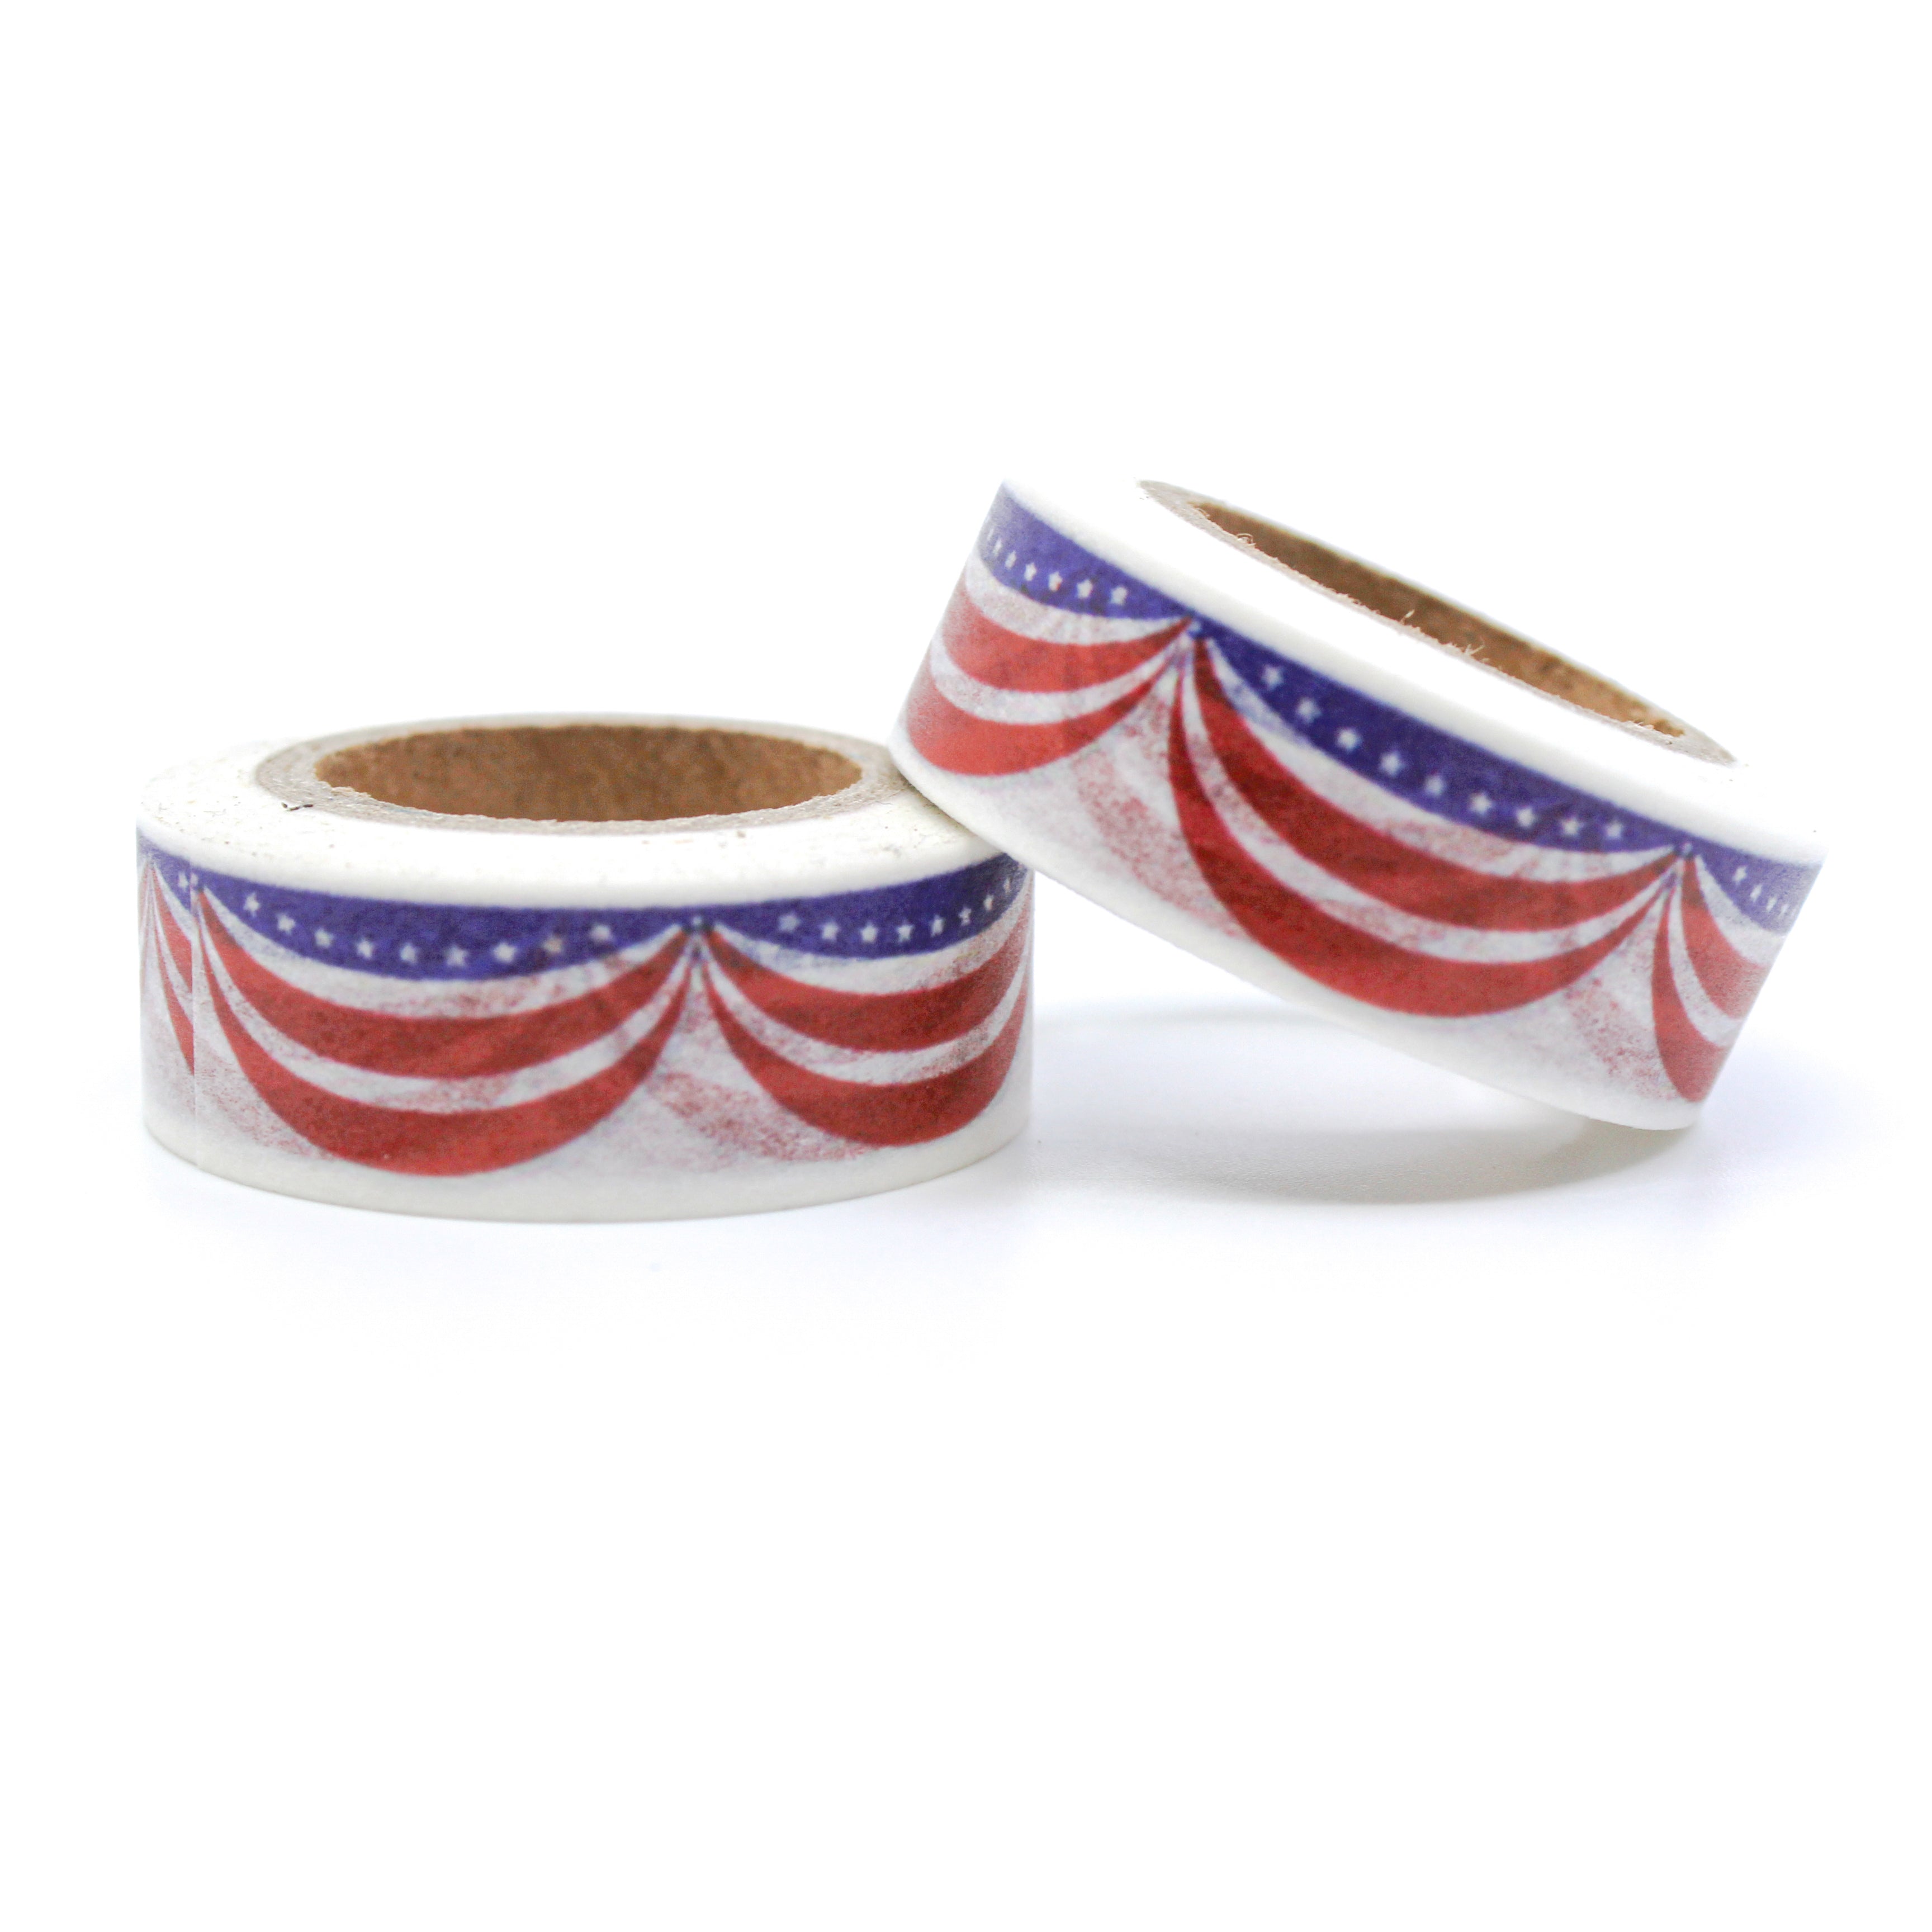 This is a red an blue American flag for your 4th of July Journal Supplies, Scrapbooking washi tapes from BBB Supplies Craft Shop